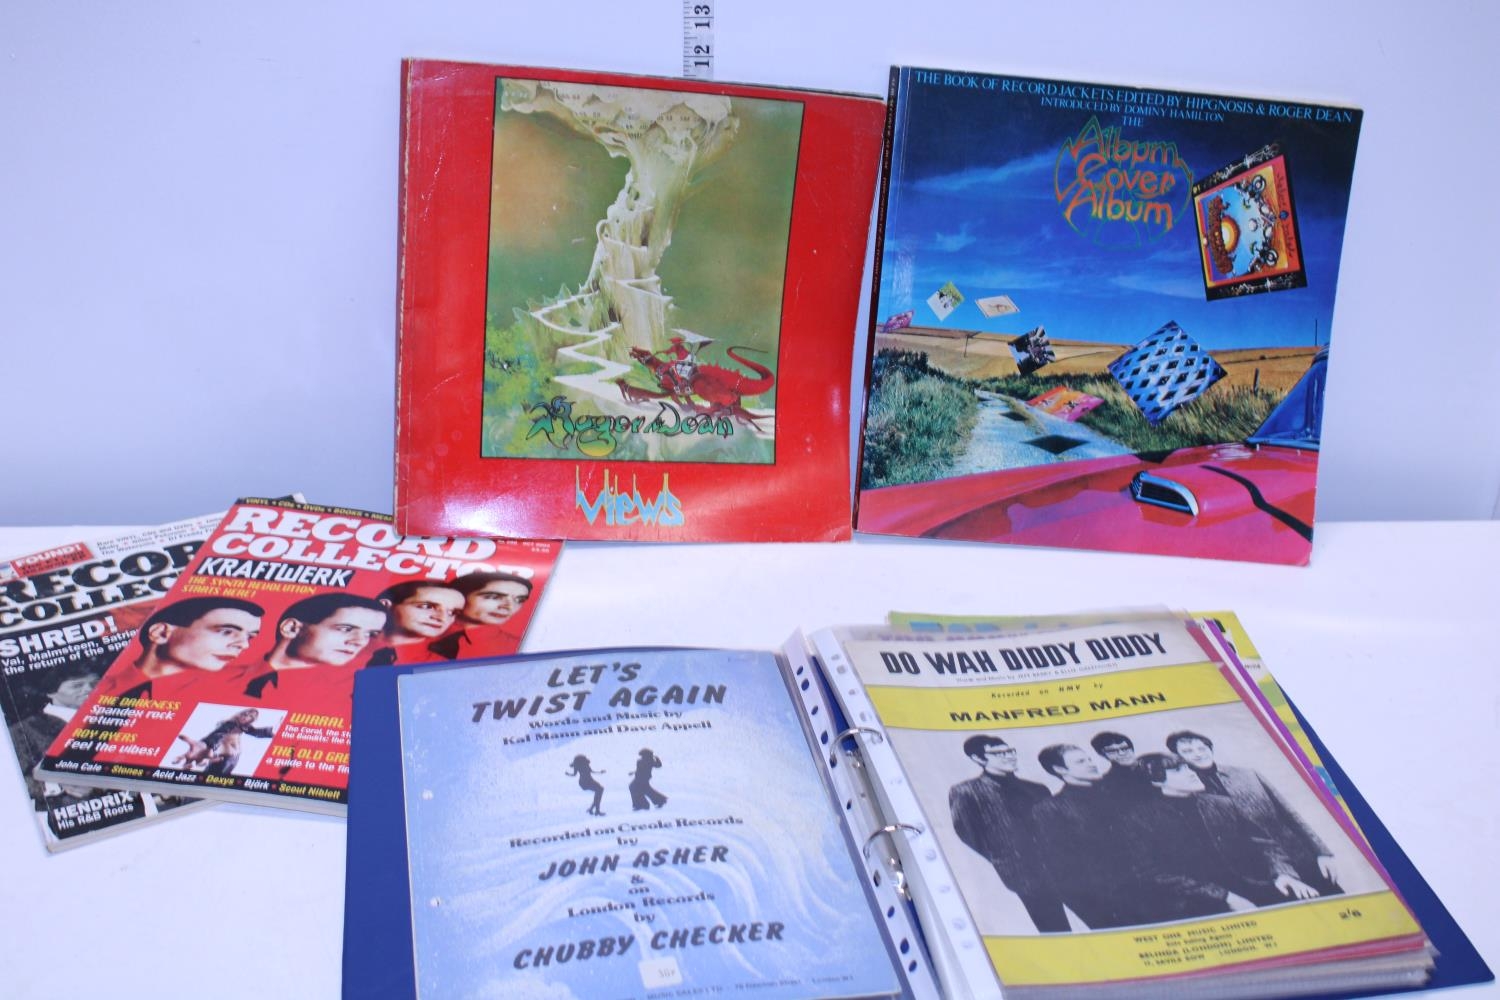 A job lot of assorted music related books etc